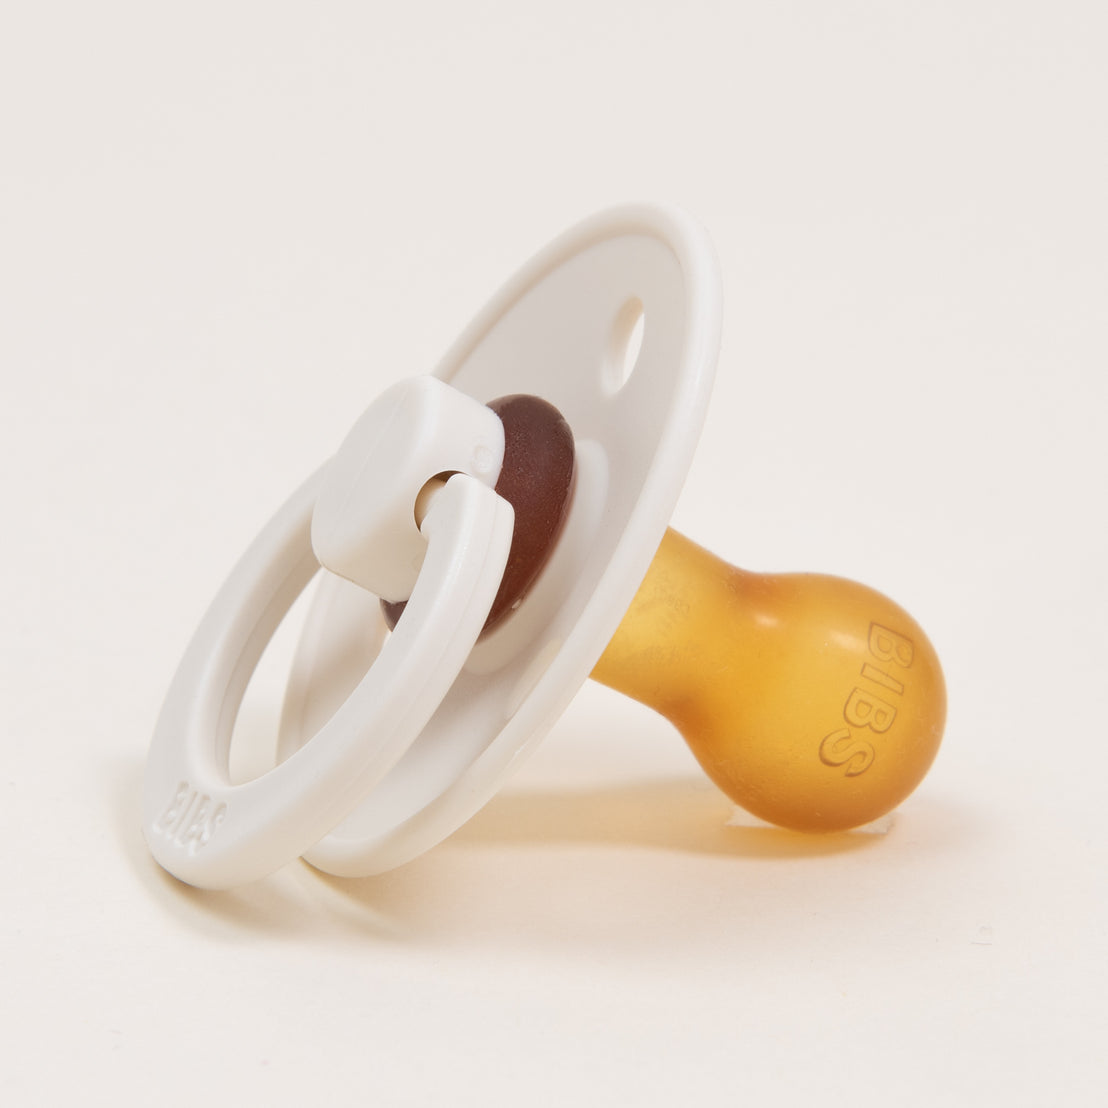 A close-up of a Bibs pacifier with a white and brown nipple and a transparent handle, set against a plain white background.